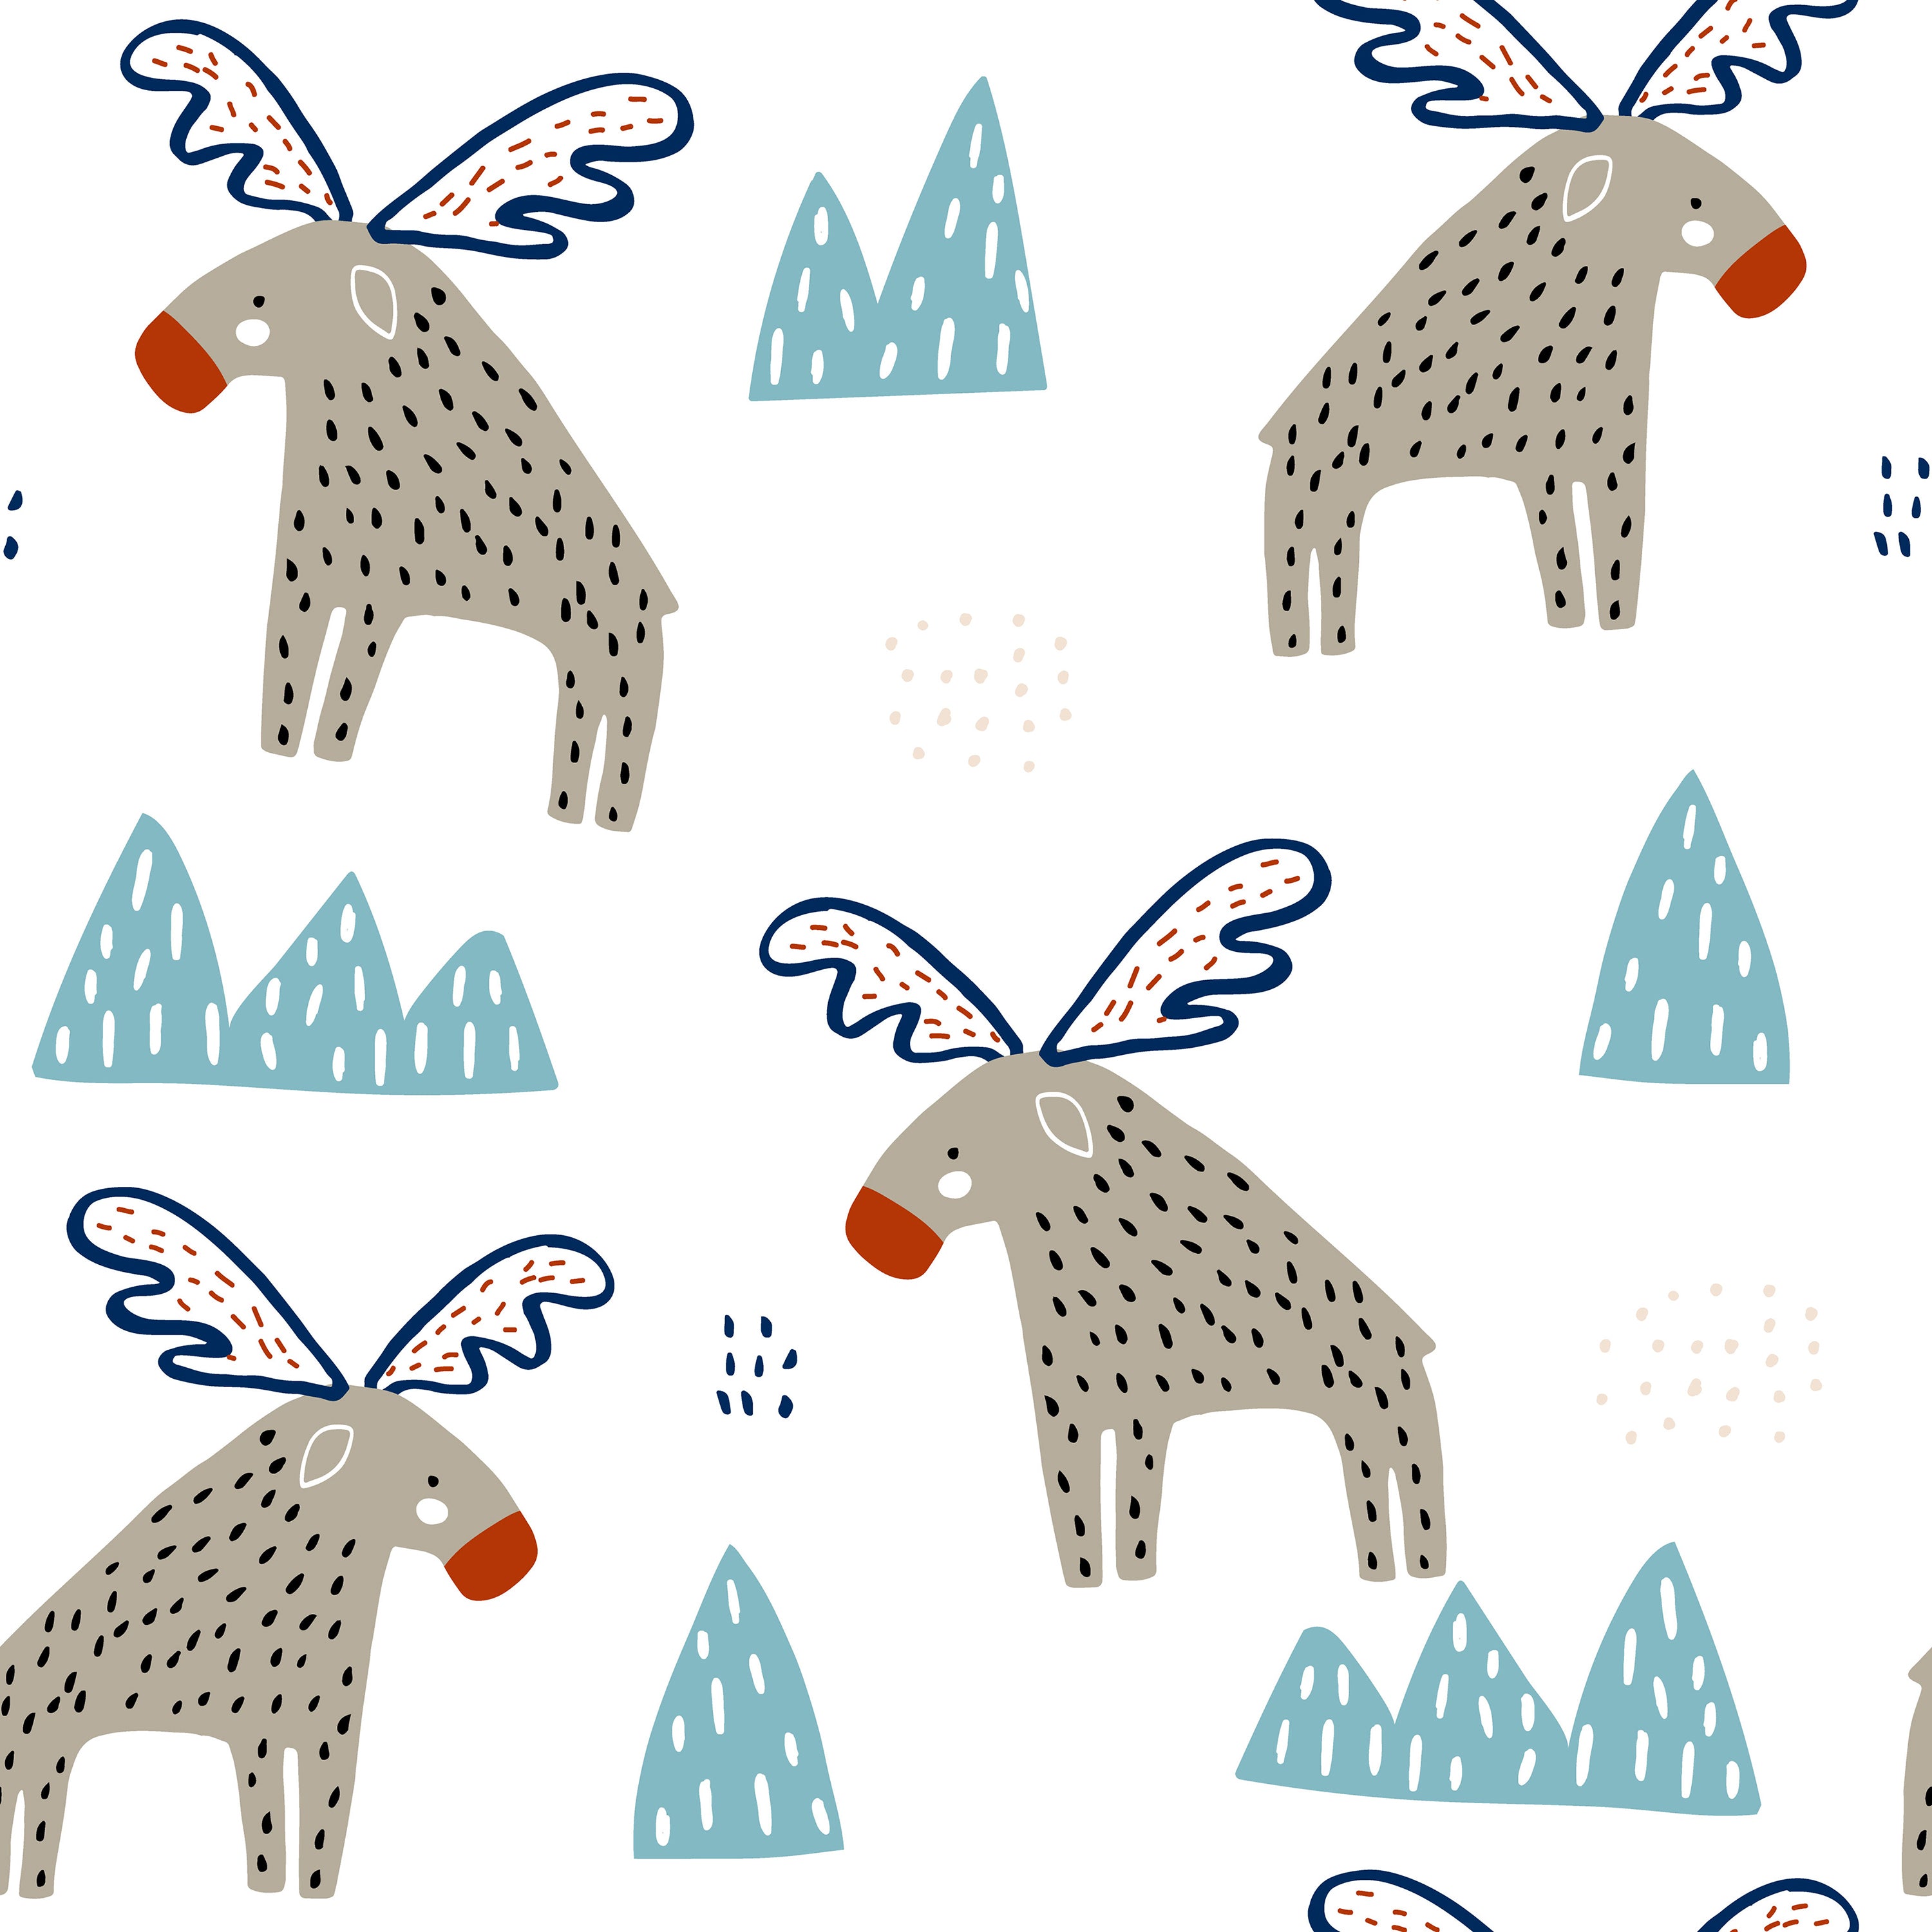 A playful wallpaper featuring whimsical moose with oversized, colorful wings amidst a landscape of stylized mountains and scattered decorative elements like dots and lines. The moose are gray with red noses and vibrant blue patterned wings, creating a fun and imaginative scene on a white background.